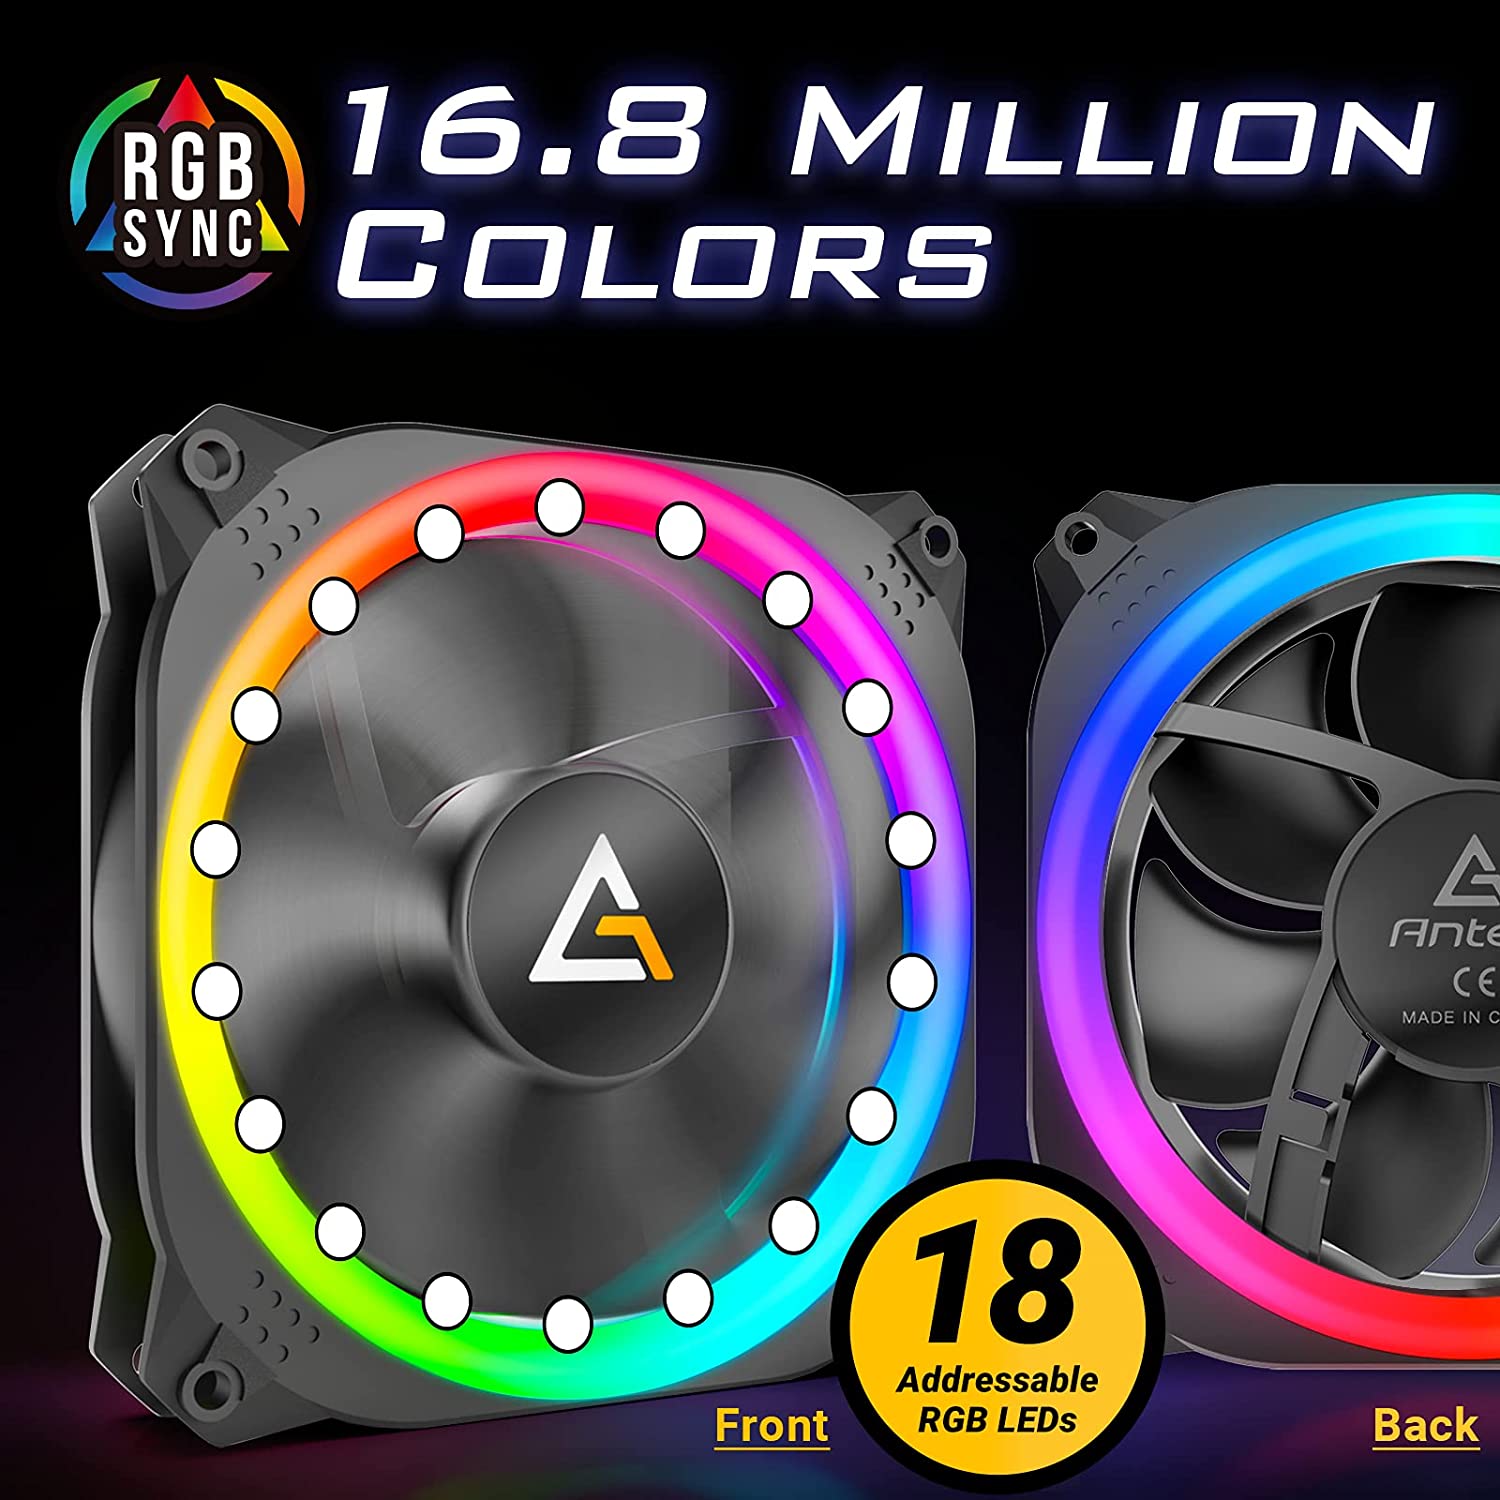 Antec RGB Fans, PC Fans 120mm RGB Fans, 5V-3PIN Addressable RGB Fans, Motherboard SYNC with 5V-3PIN, 120mm Fan 5 Packs with Controller, Prizm Series RGB Fans